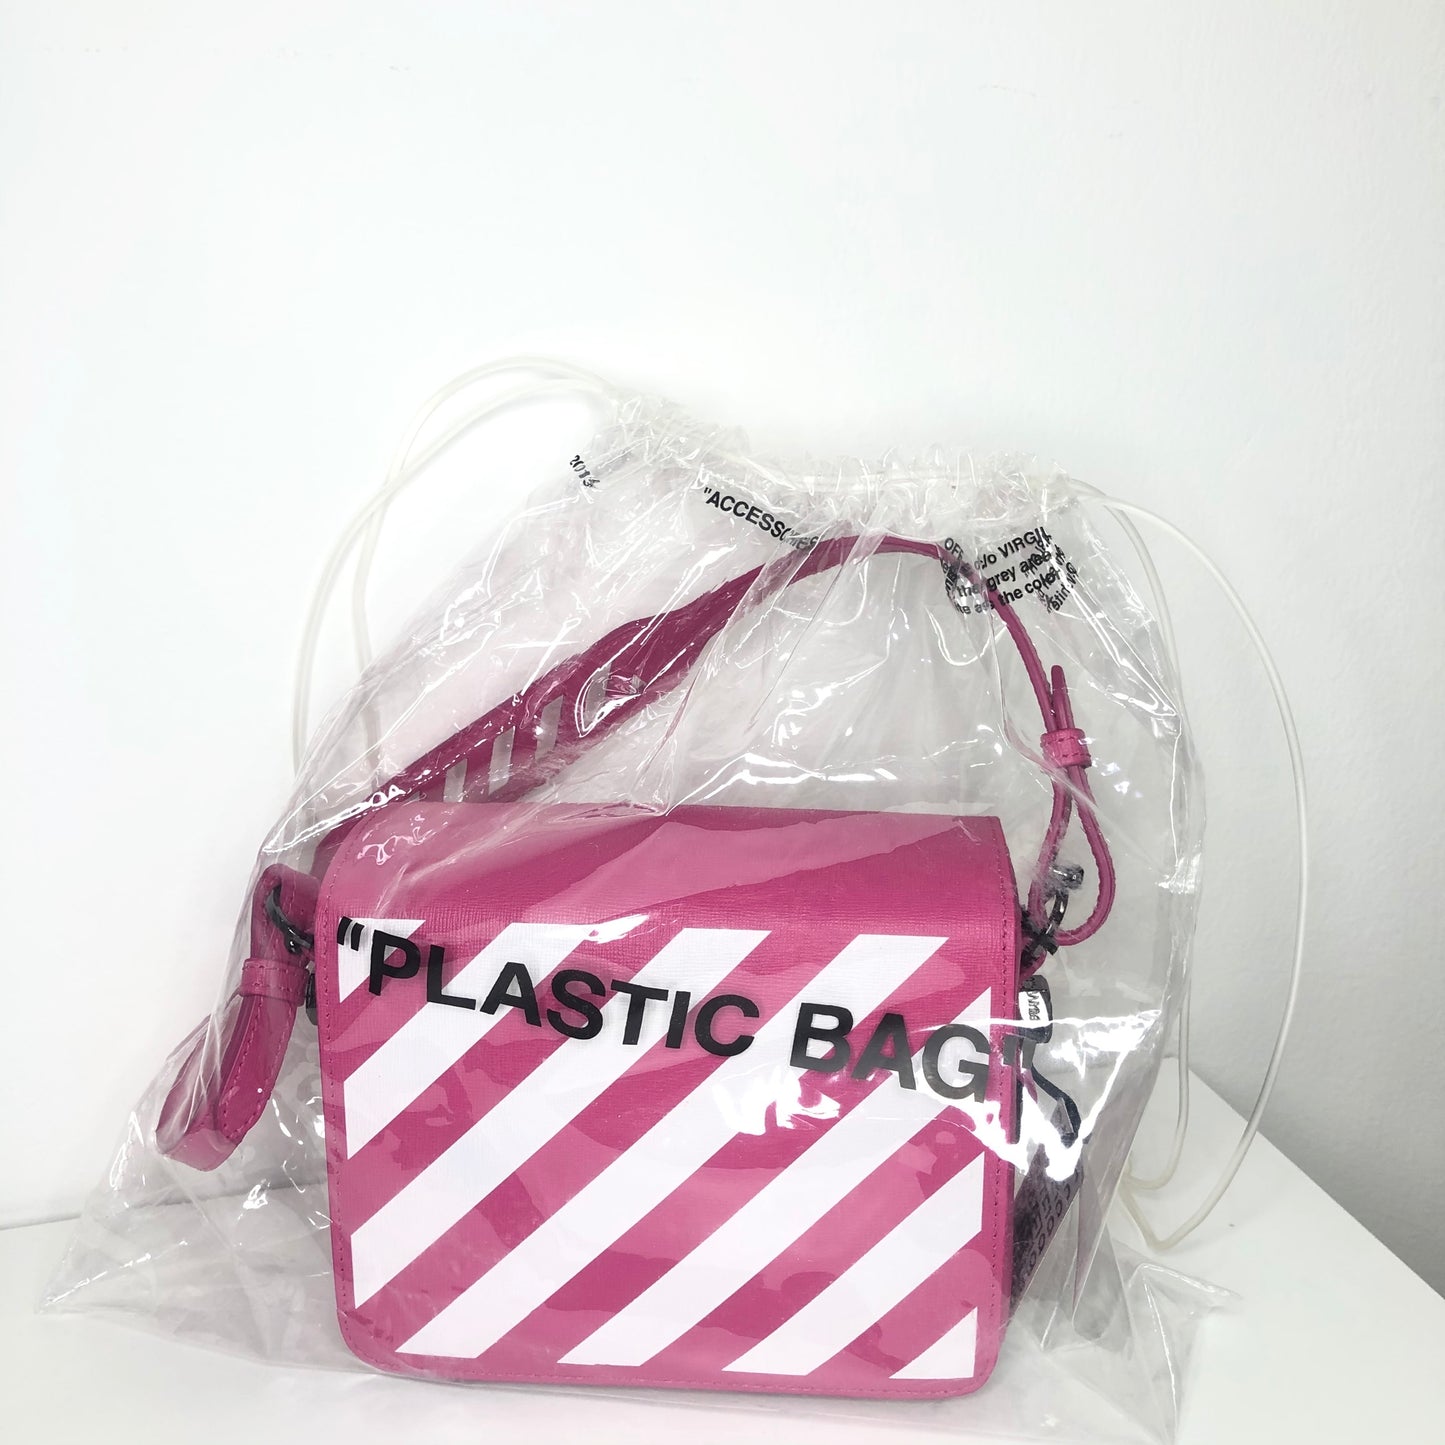 Off-White C/O Virgil Abloh 19SS Pink Stripe Shoulder Bag - Shop Streetwear, Sneakers, Slippers and Gifts online | Malaysia - The Factory KL